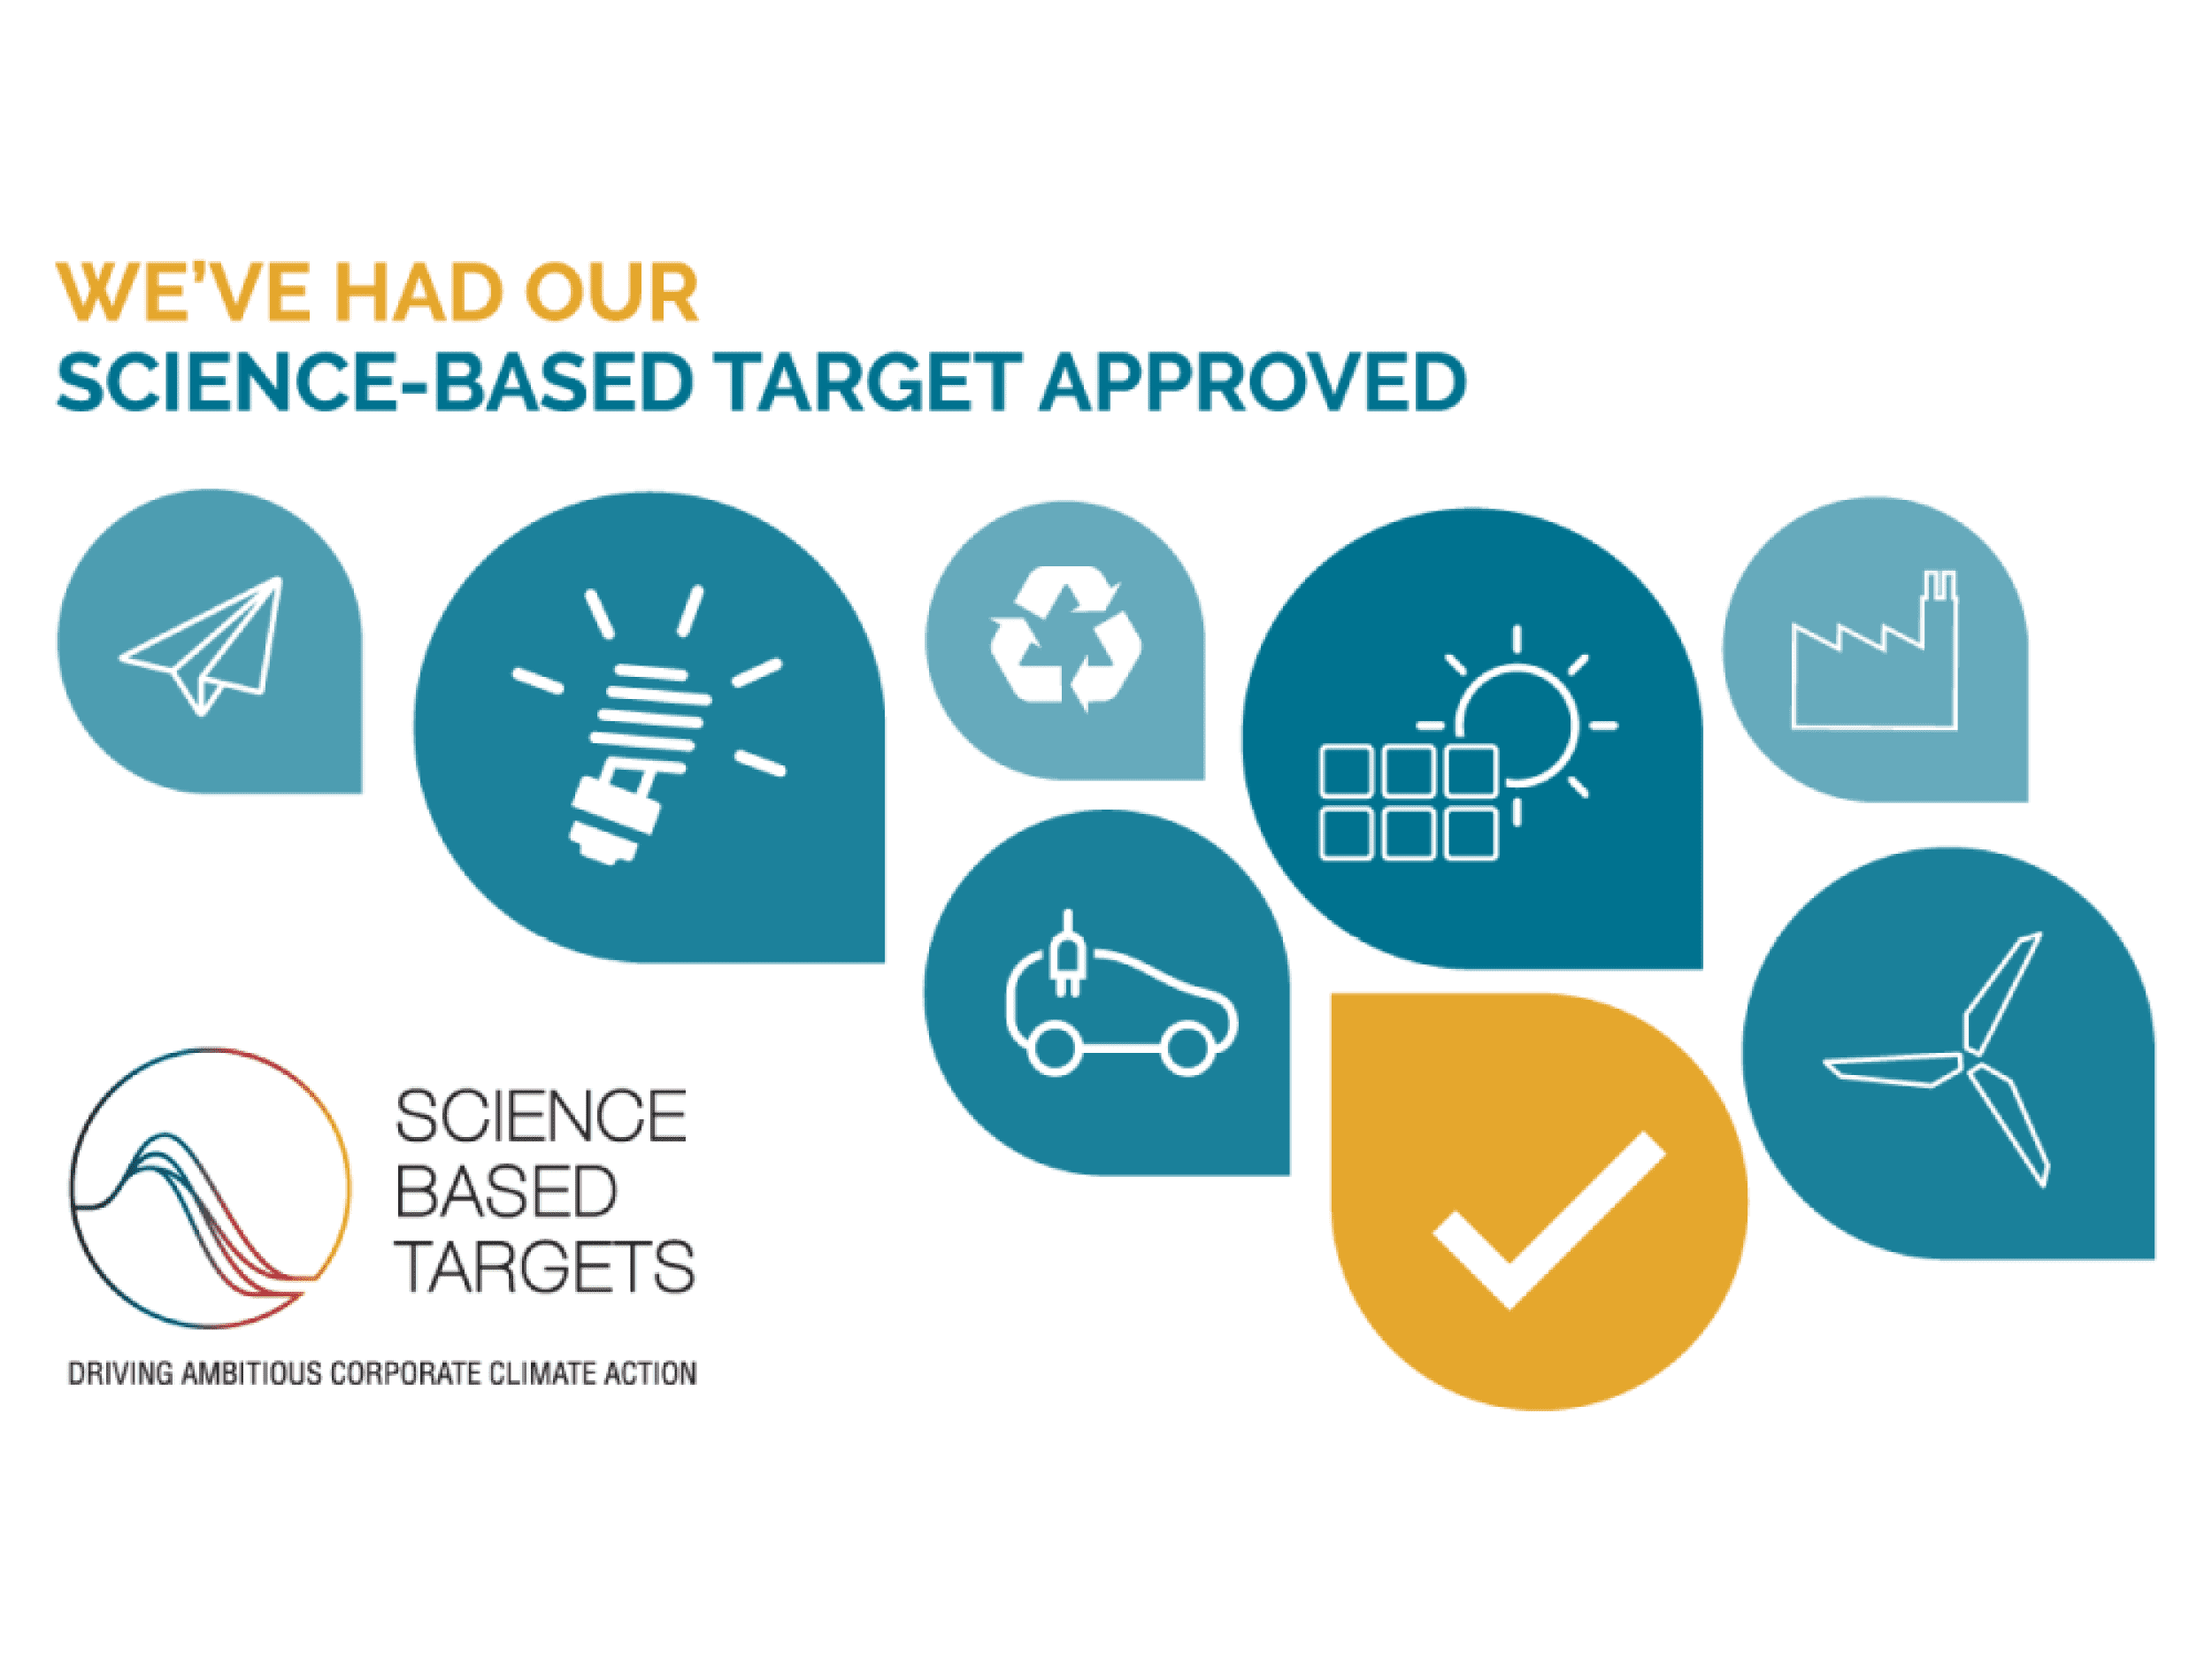 Graphic Packaging receives approval from the Science Based Targets initiative (SBTi) on its greenhouse gas (GHG) reduction targets, validating the company's commitment to reduce its carbon footprint.